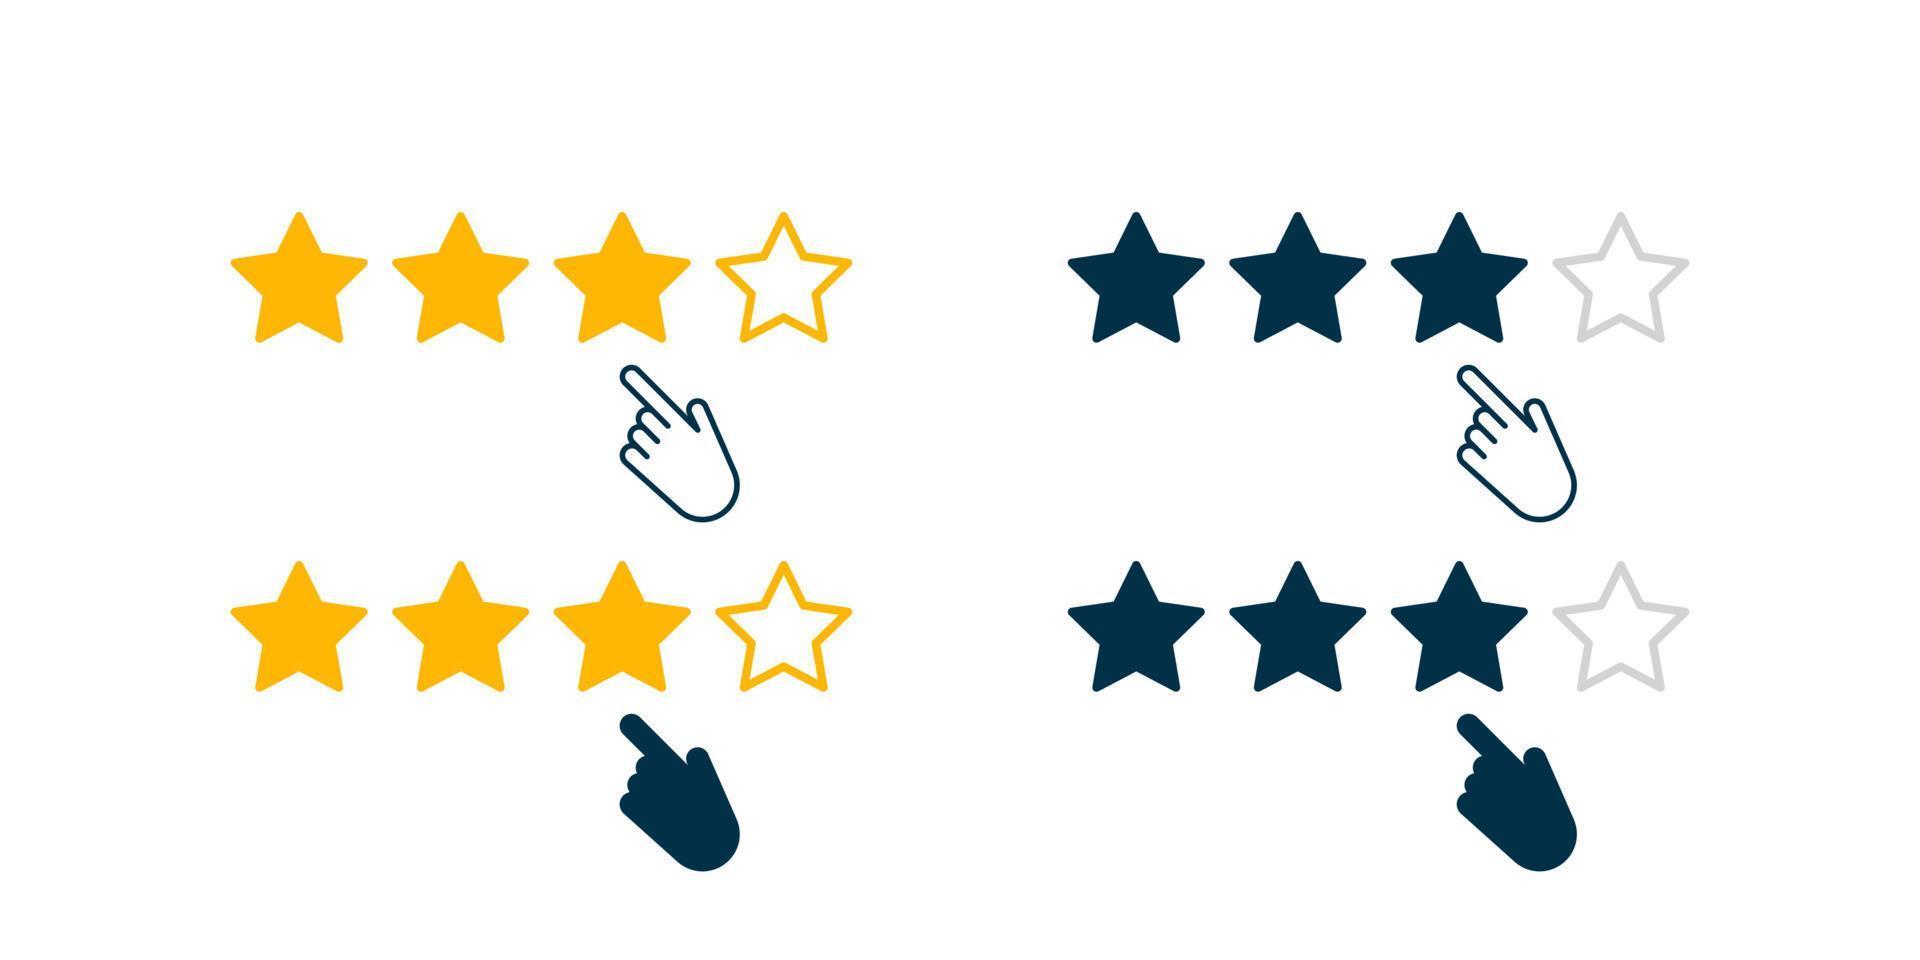 Rating icons with pointers. Satisfaction survey icons. Customer review satisfaction feedback survey concept. Vector illustration